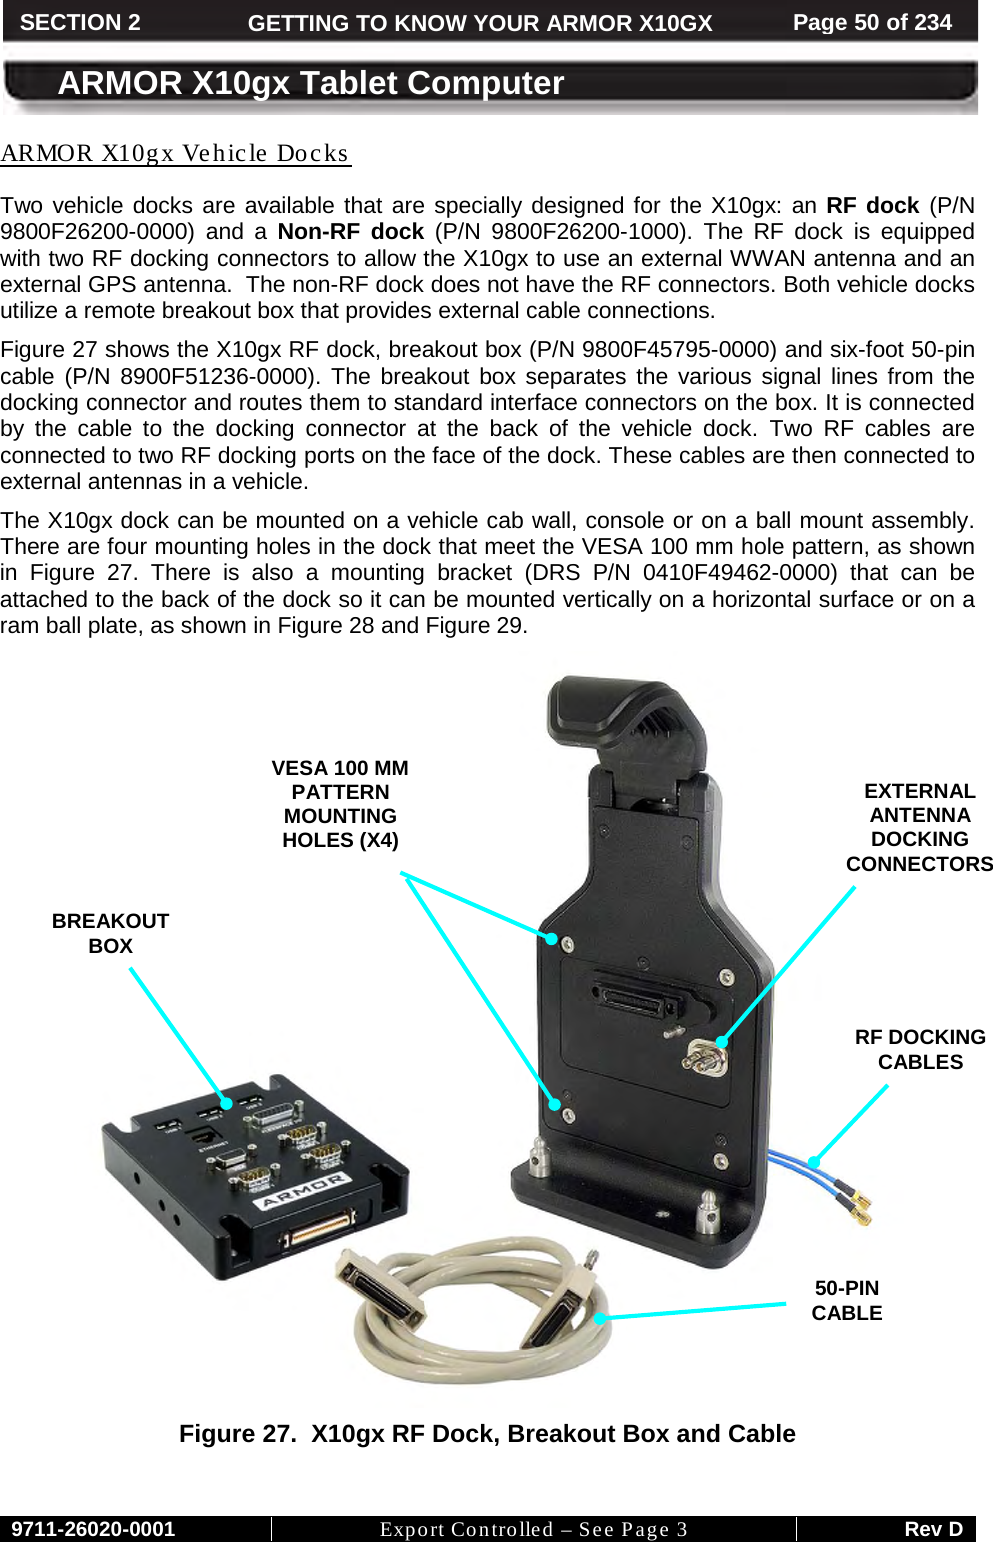     9711-26020-0001 Export Controlled – See Page 3 Rev D SECTION 2 GETTING TO KNOW YOUR ARMOR X10GX Page 50 of 234  ARMOR X10gx Tablet Computer Two vehicle docks are available that are specially designed for the X10gx: an RF dock (P/N 9800F26200-0000)  and a Non-RF dock (P/N 9800F26200-1000). The RF dock is equipped with two RF docking connectors to allow the X10gx to use an external WWAN antenna and an external GPS antenna.  The non-RF dock does not have the RF connectors. Both vehicle docks utilize a remote breakout box that provides external cable connections. ARMOR X10gx Vehicle Docks Figure 27 shows the X10gx RF dock, breakout box (P/N 9800F45795-0000) and six-foot 50-pin cable (P/N  8900F51236-0000). The breakout box separates the various signal lines from the docking connector and routes them to standard interface connectors on the box. It is connected by  the cable to the docking connector at the back of the vehicle dock. Two RF cables are connected to two RF docking ports on the face of the dock. These cables are then connected to external antennas in a vehicle. The X10gx dock can be mounted on a vehicle cab wall, console or on a ball mount assembly.  There are four mounting holes in the dock that meet the VESA 100 mm hole pattern, as shown in  Figure  27. There is also a mounting bracket (DRS P/N 0410F49462-0000) that can be attached to the back of the dock so it can be mounted vertically on a horizontal surface or on a ram ball plate, as shown in Figure 28 and Figure 29.   Figure 27.  X10gx RF Dock, Breakout Box and Cable    EXTERNAL ANTENNA DOCKING CONNECTORS BREAKOUT  BOX VESA 100 MM PATTERN MOUNTING HOLES (X4)  50-PIN CABLE RF DOCKING CABLES 